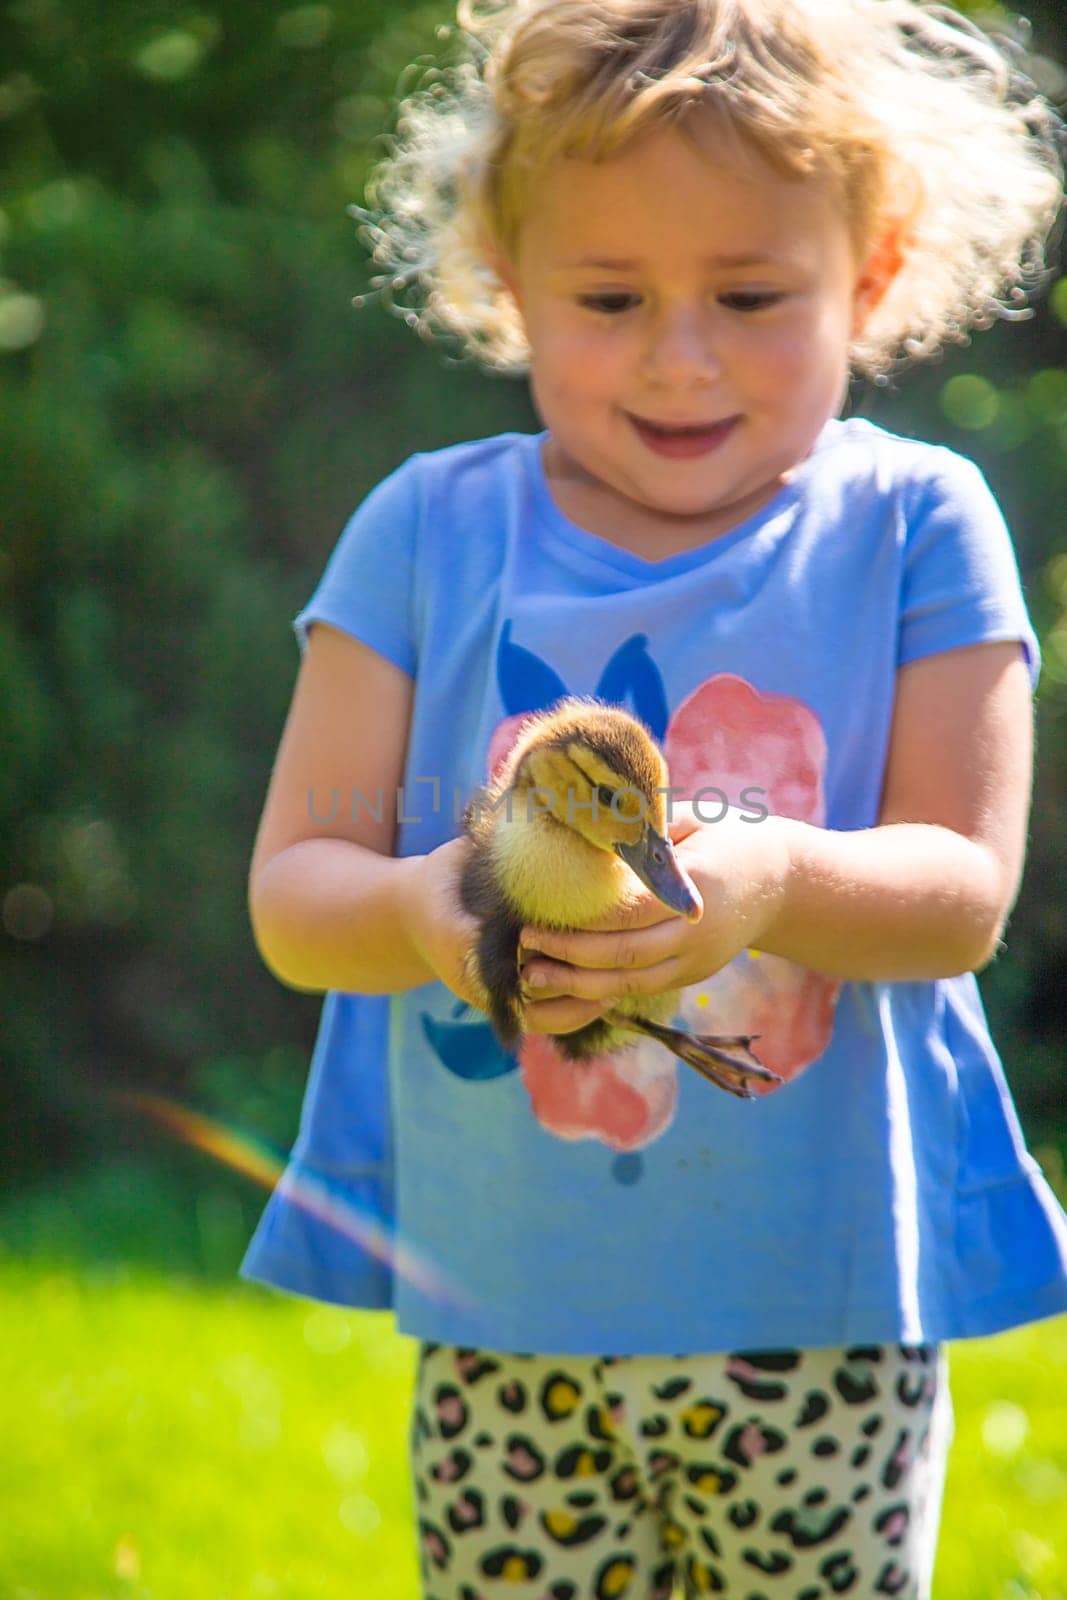 A child plays with a duckling. Selective focus. animal.